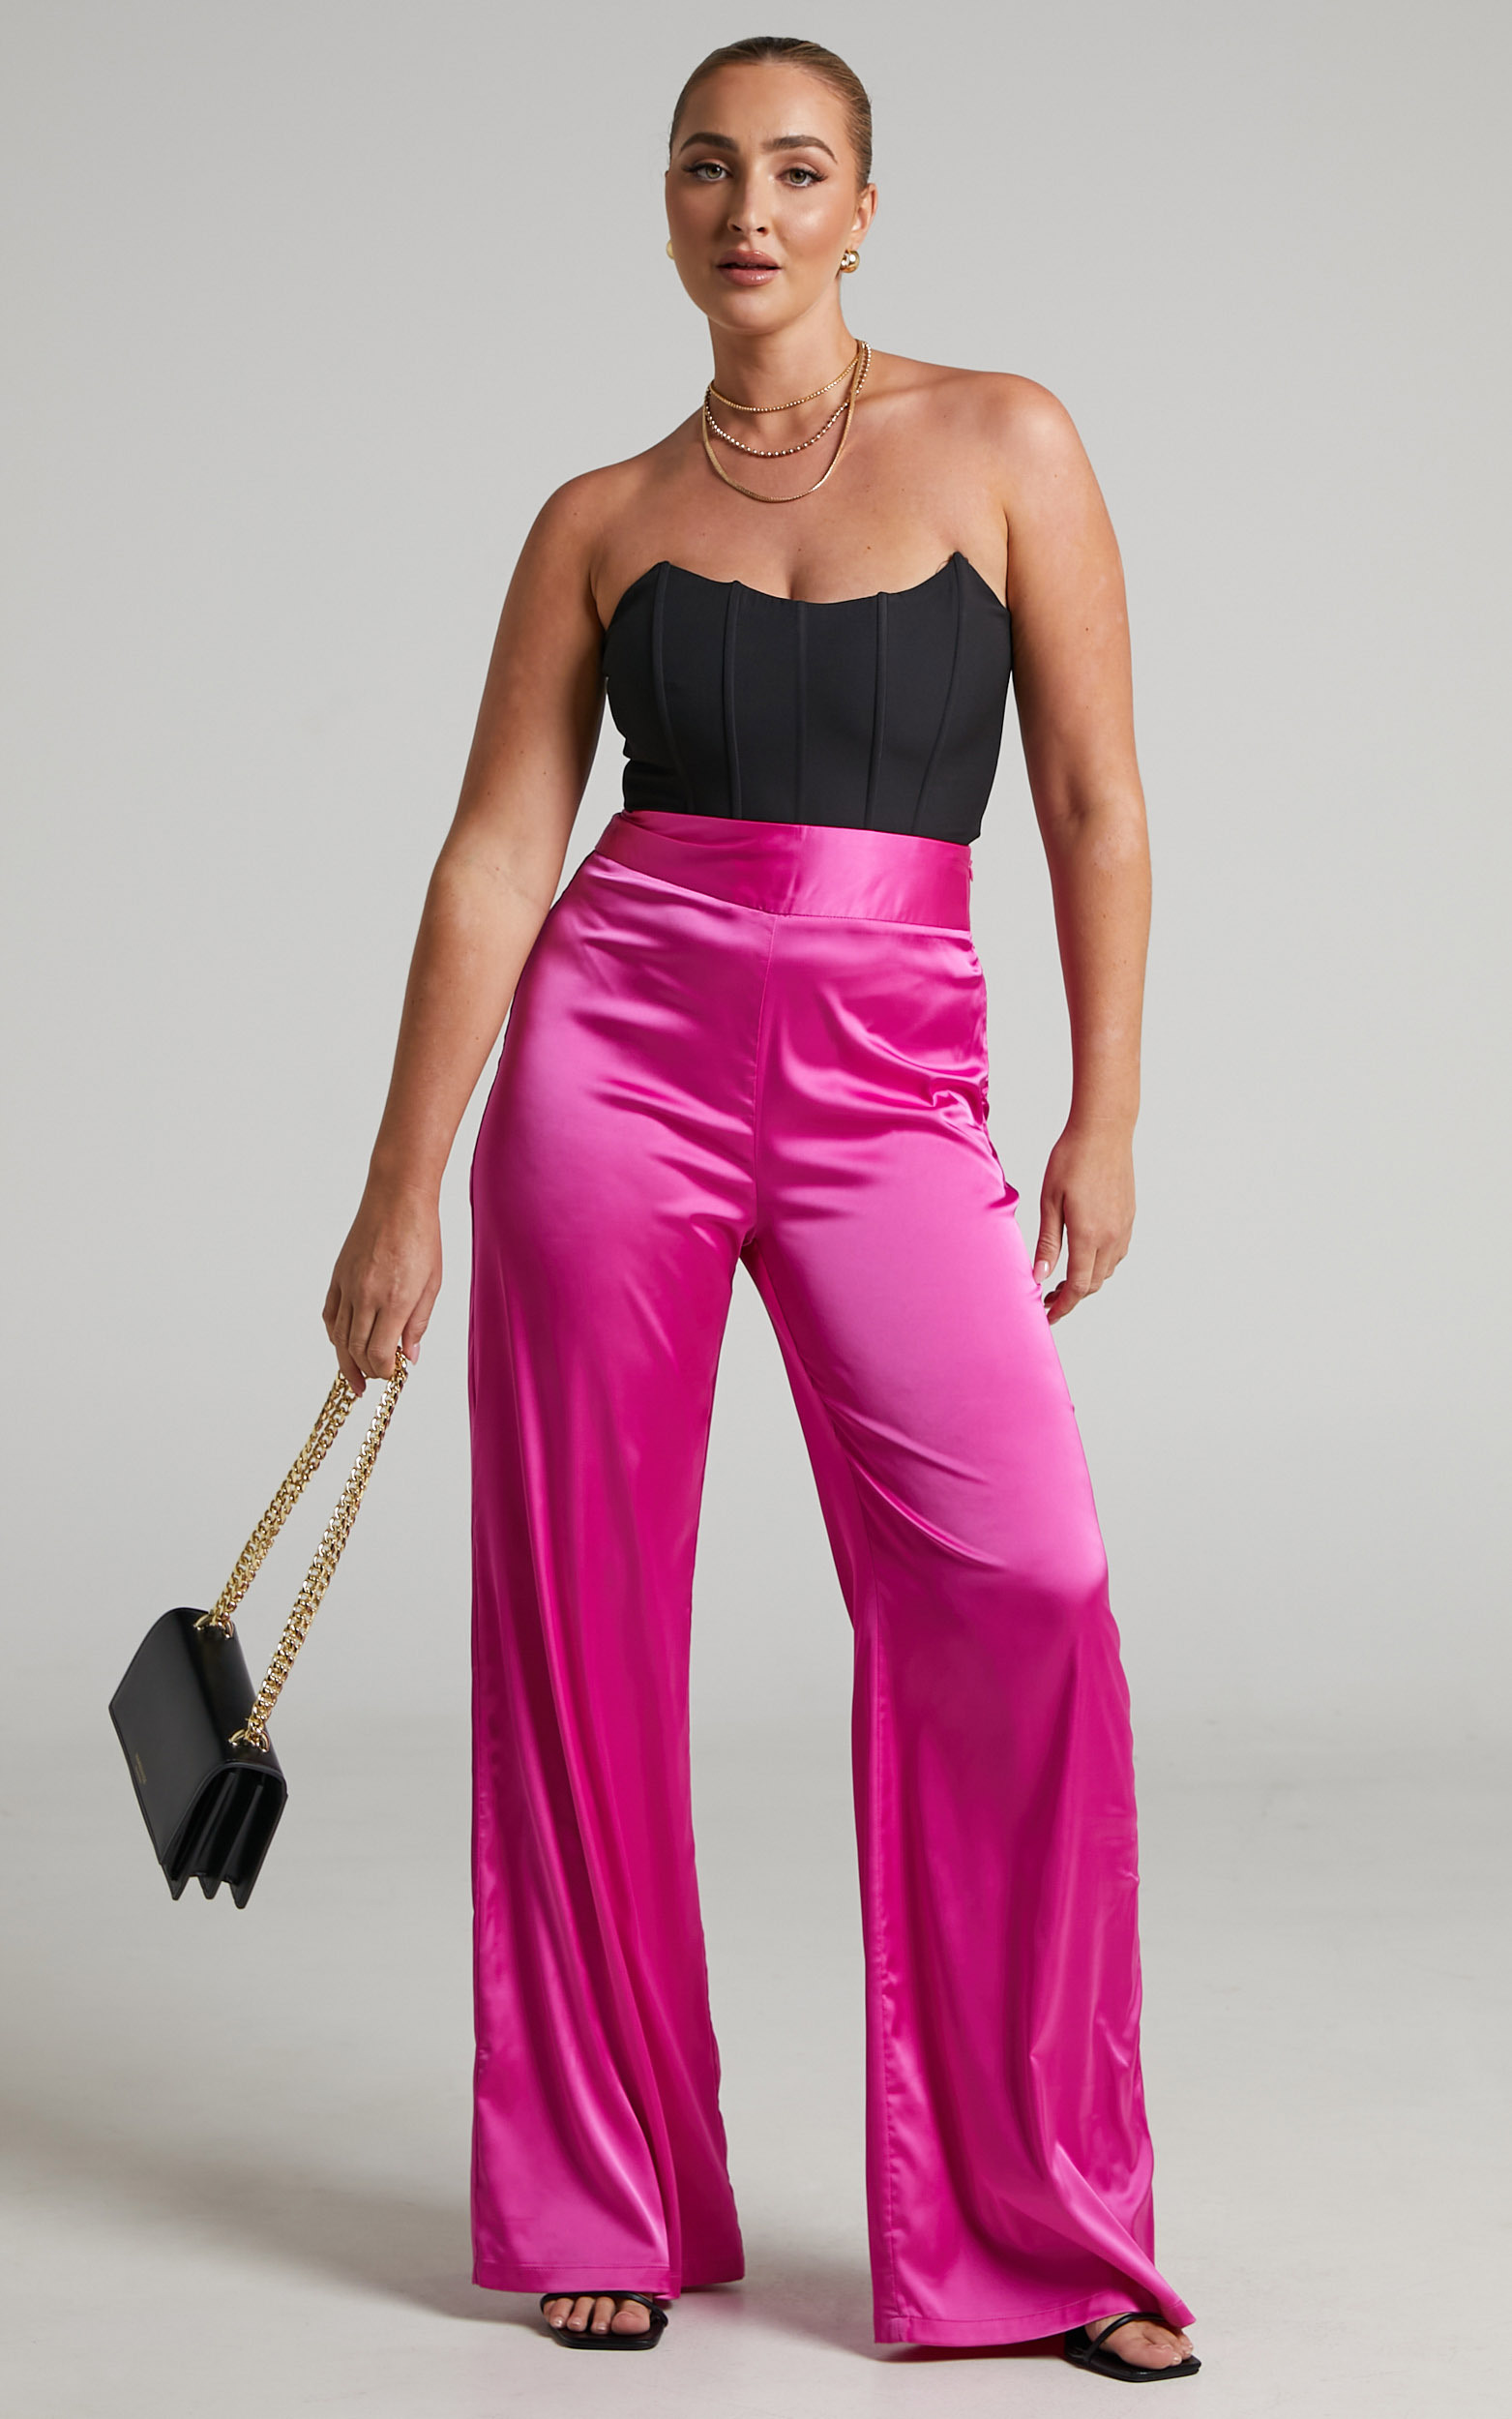 Kristelle High Waist Wide Leg Palazzo Pants in Hot Pink - 04, PNK1, hi-res image number null